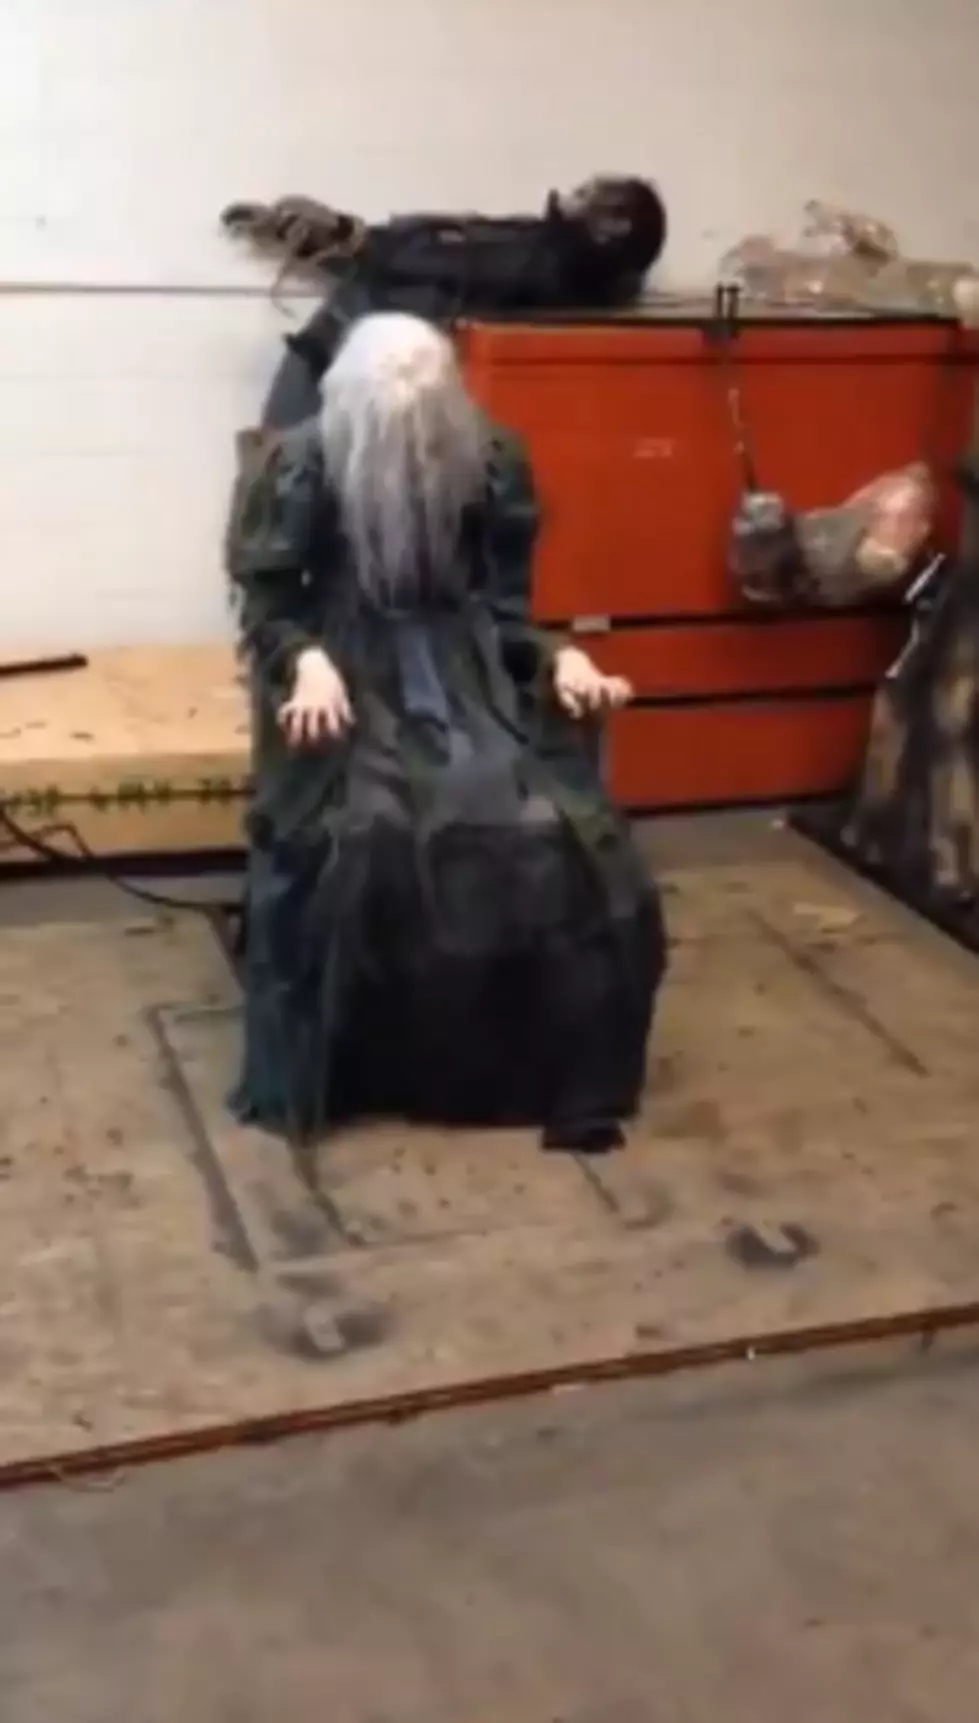 The Terrifying Screaming Chair Could Be Scariest Halloween Decoration EVER [Video]